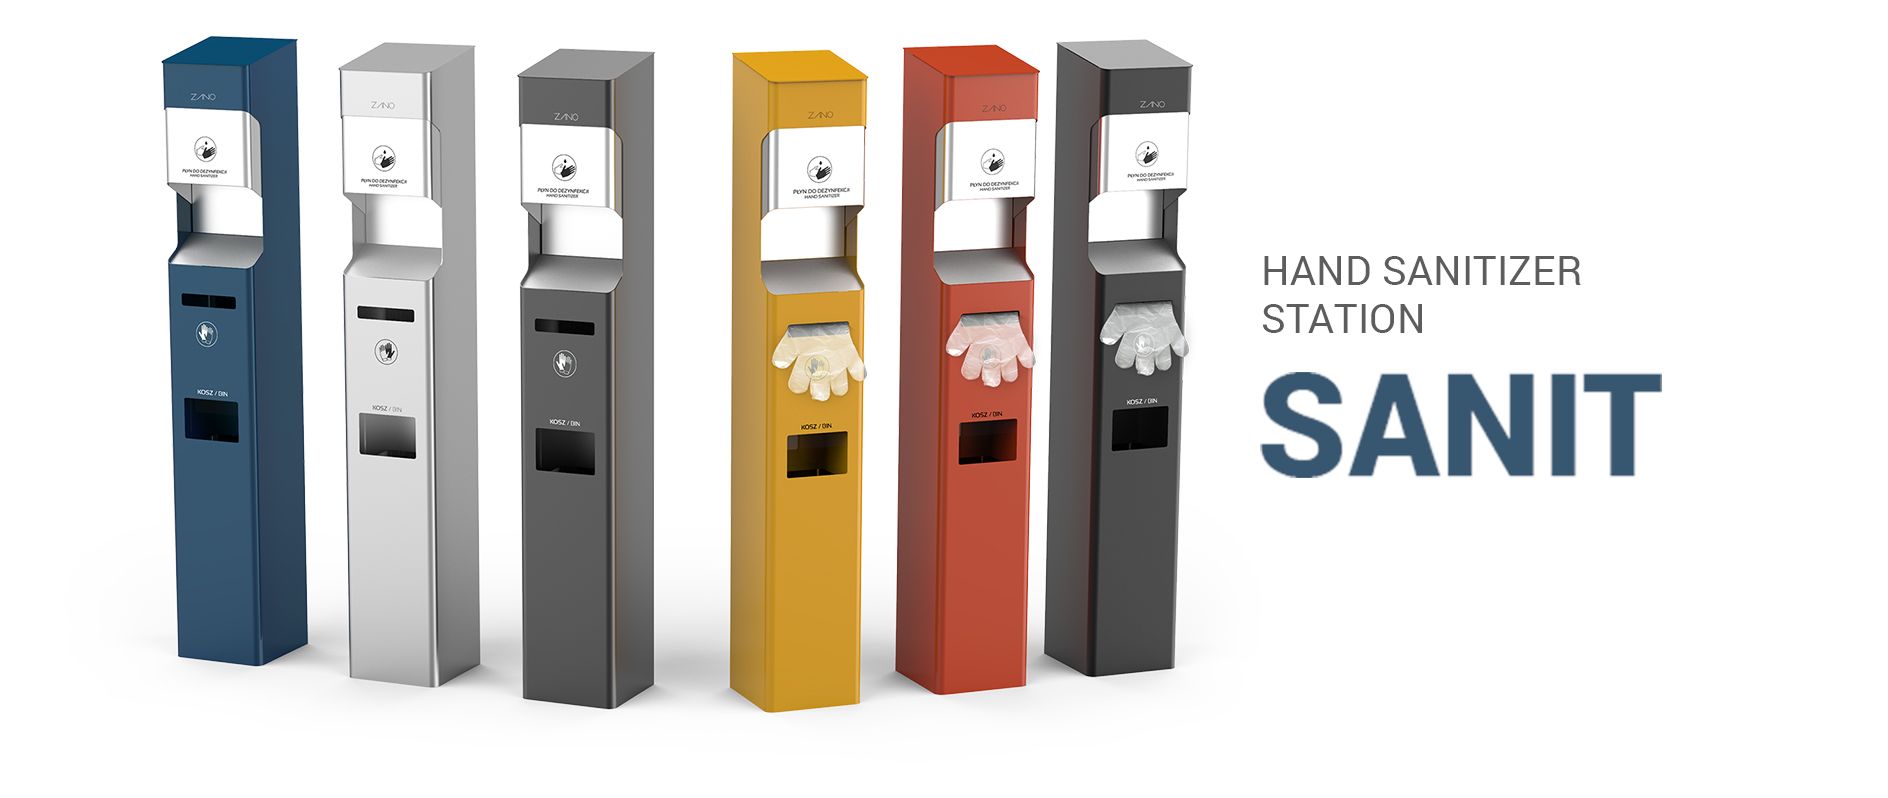 CONTACT-FREE hand sanitizer station made of steel